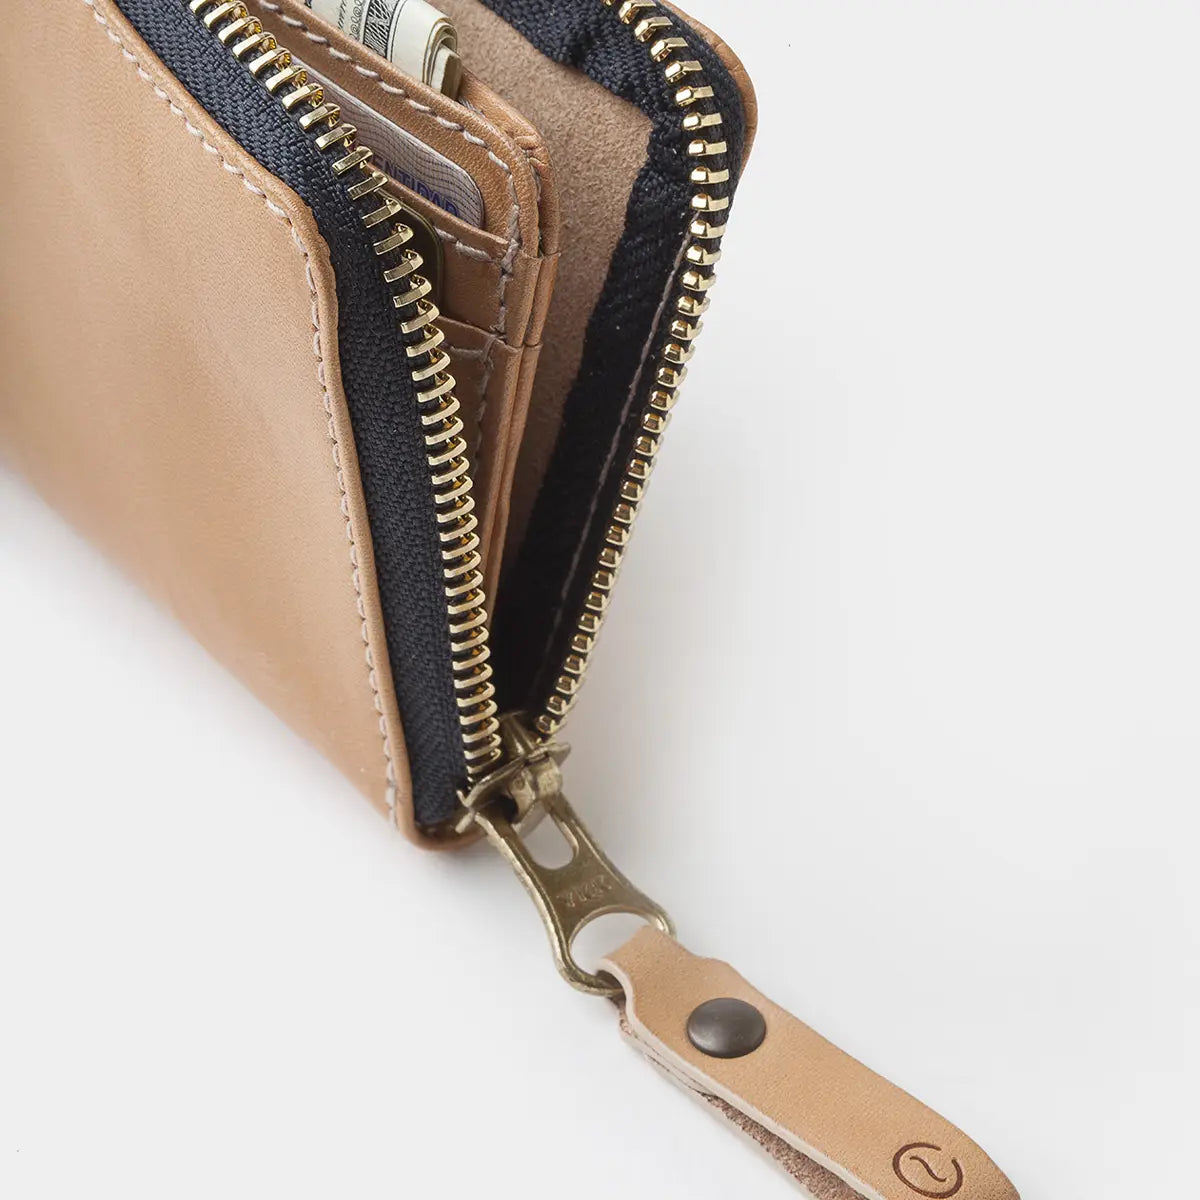 Leather Zip Wallet - Natural